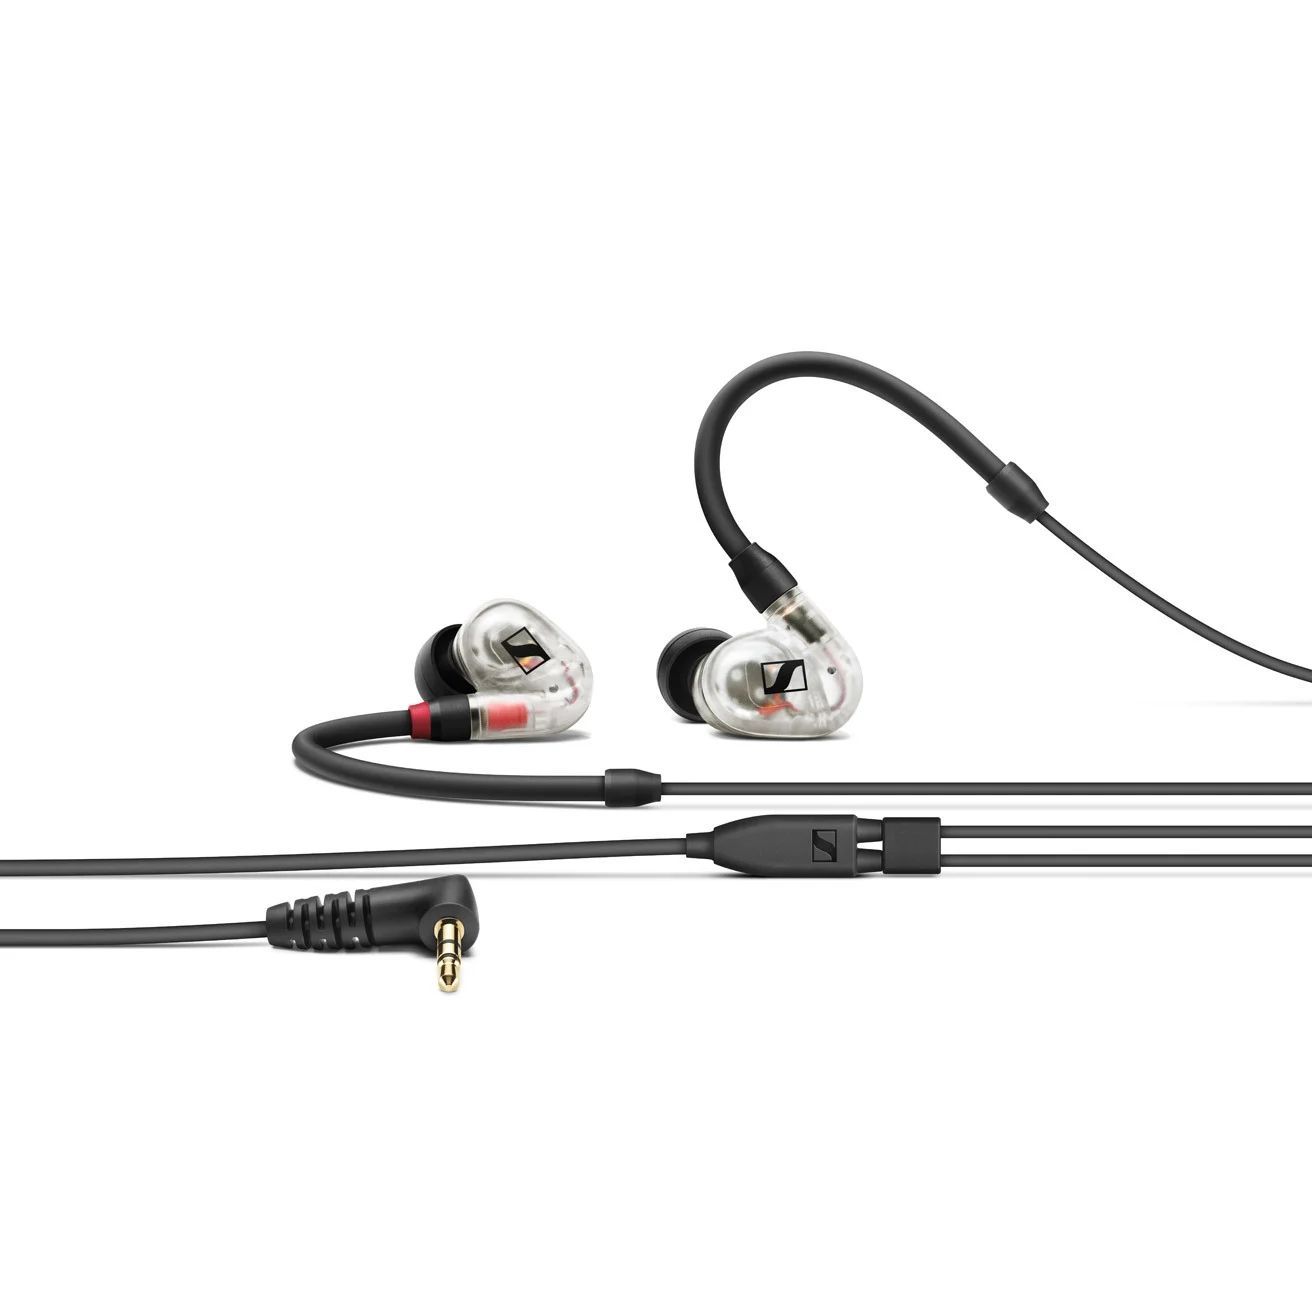 Sennheiser IE 100 Pro Clear Dynamische In-Ear-Monitoring-Hörer Farbe:transparent